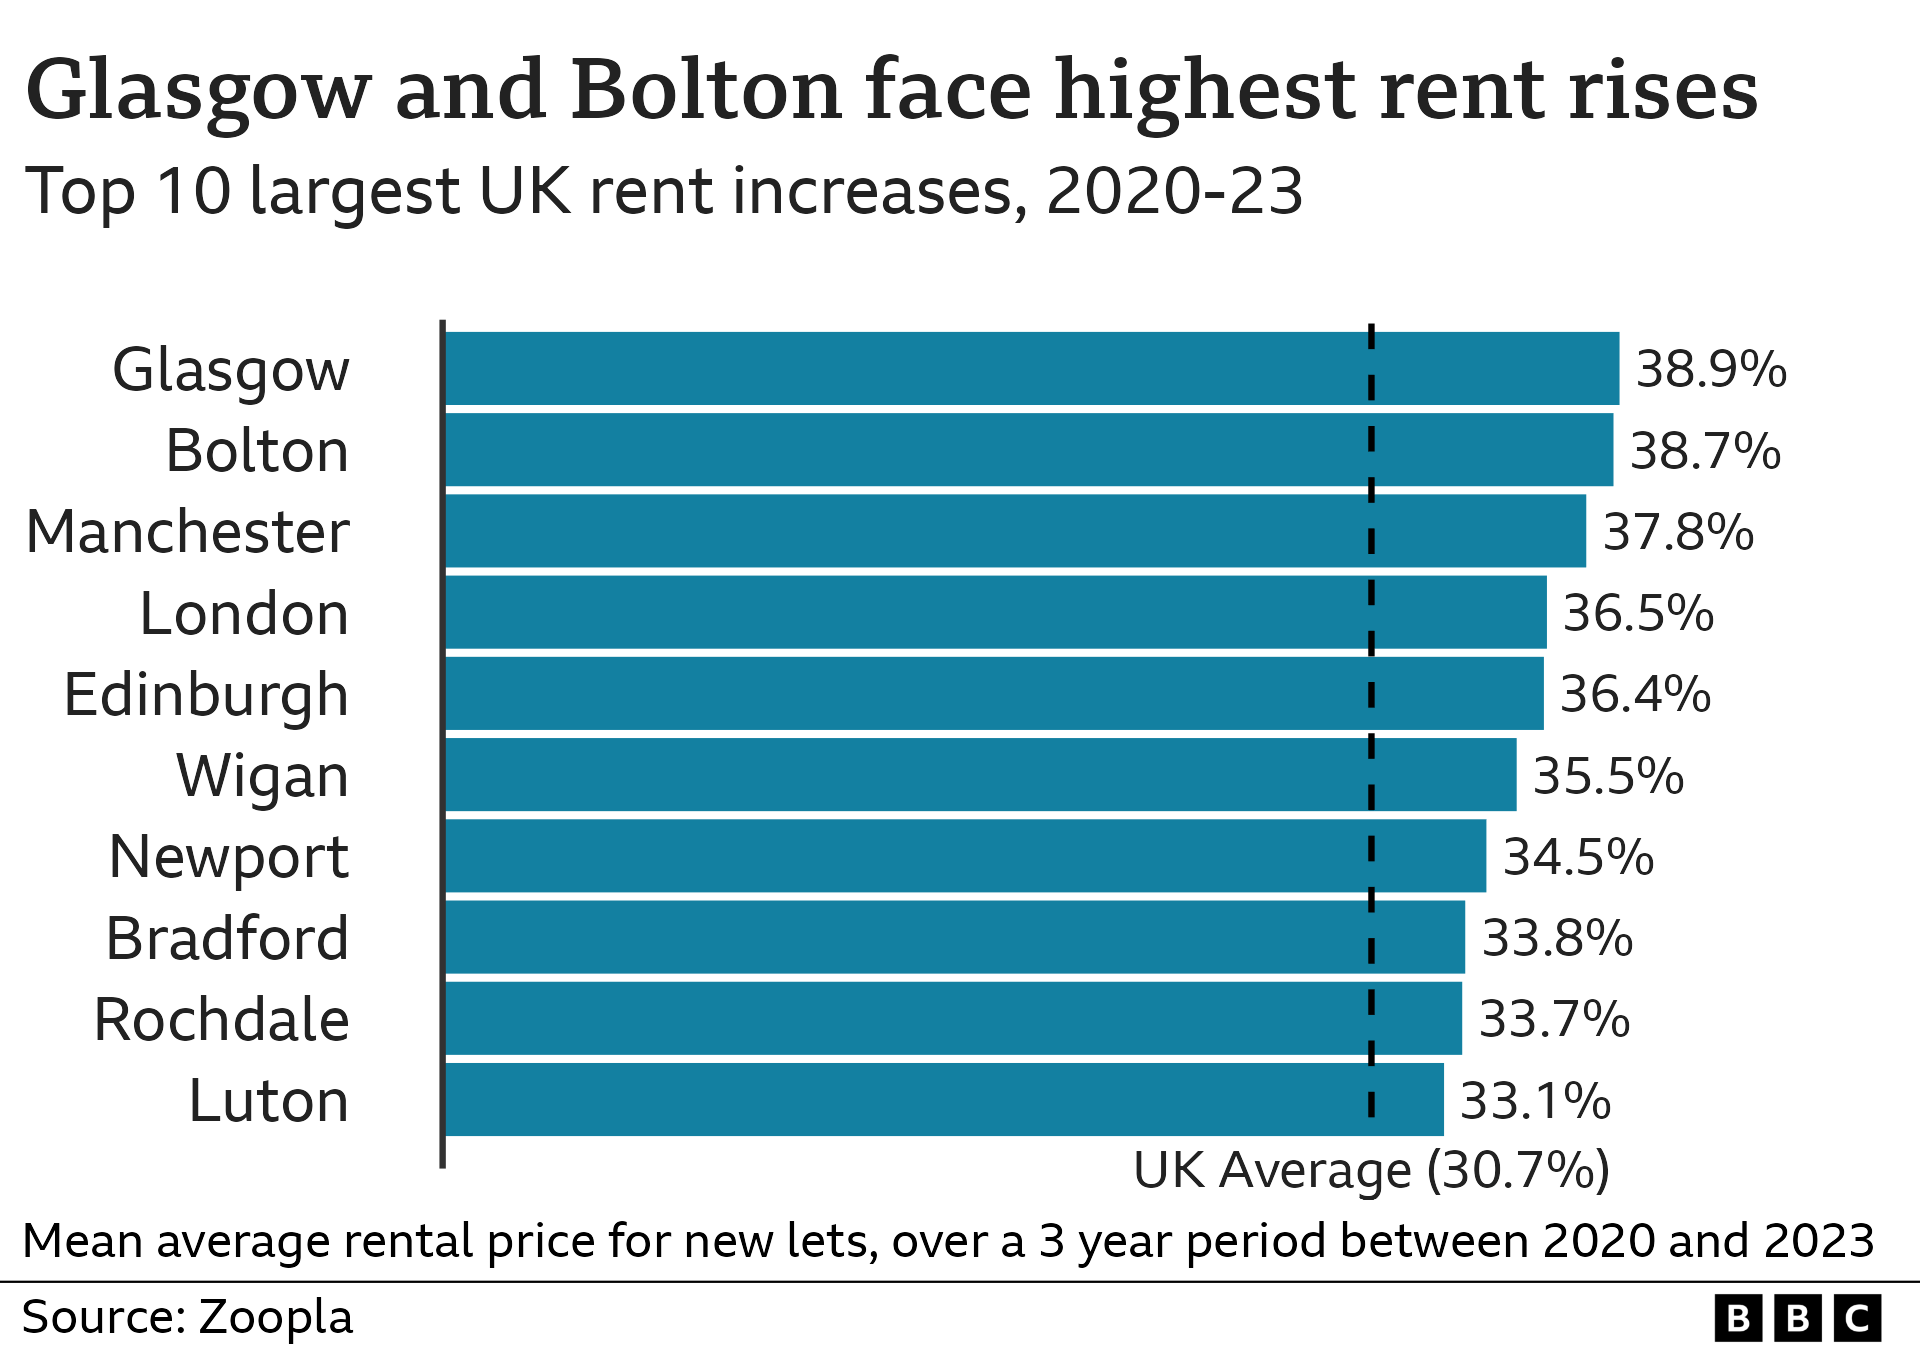 Graphic showing rent rises in cities and towns in the UK in 2020-03, led by Glasgow and Bolton